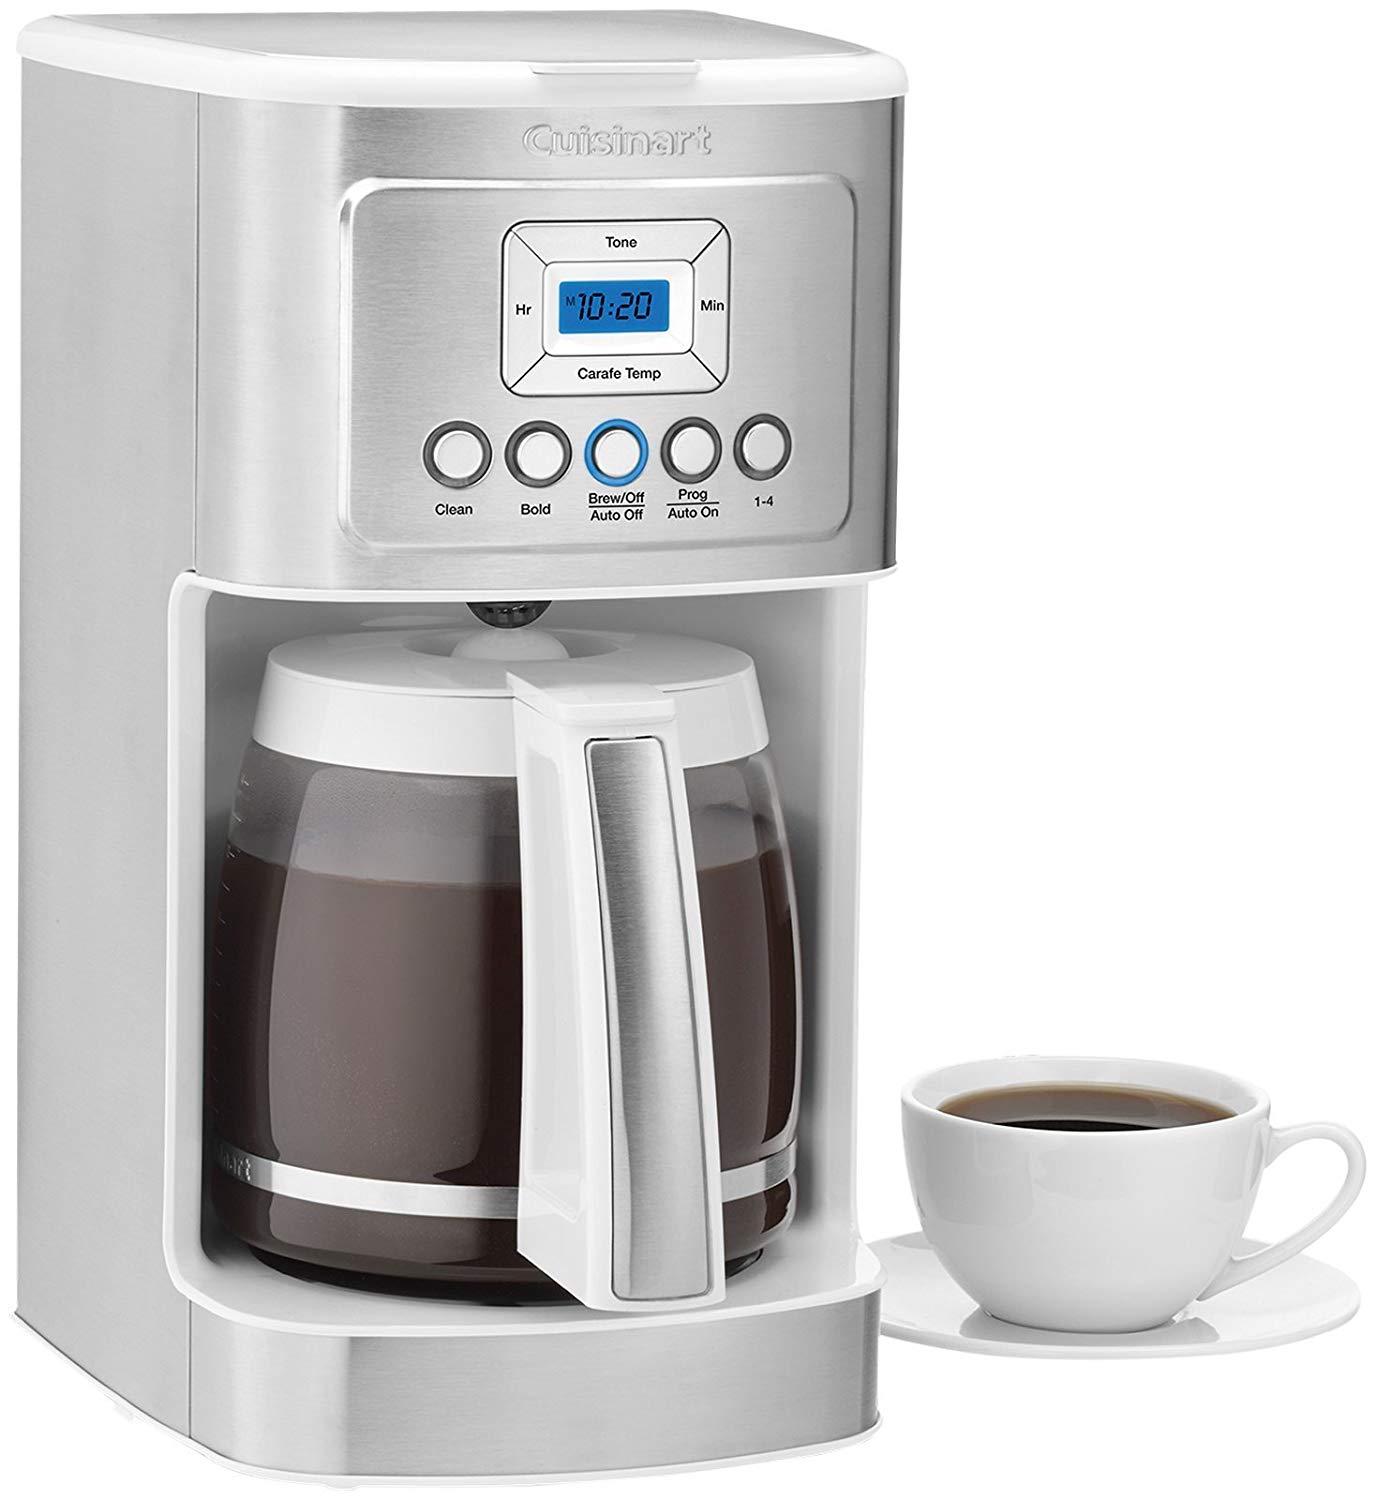 Cuisinart DCC-3200W 14C Glass Carafe with Stainless Steel Handle Programmable Coffeemaker, White